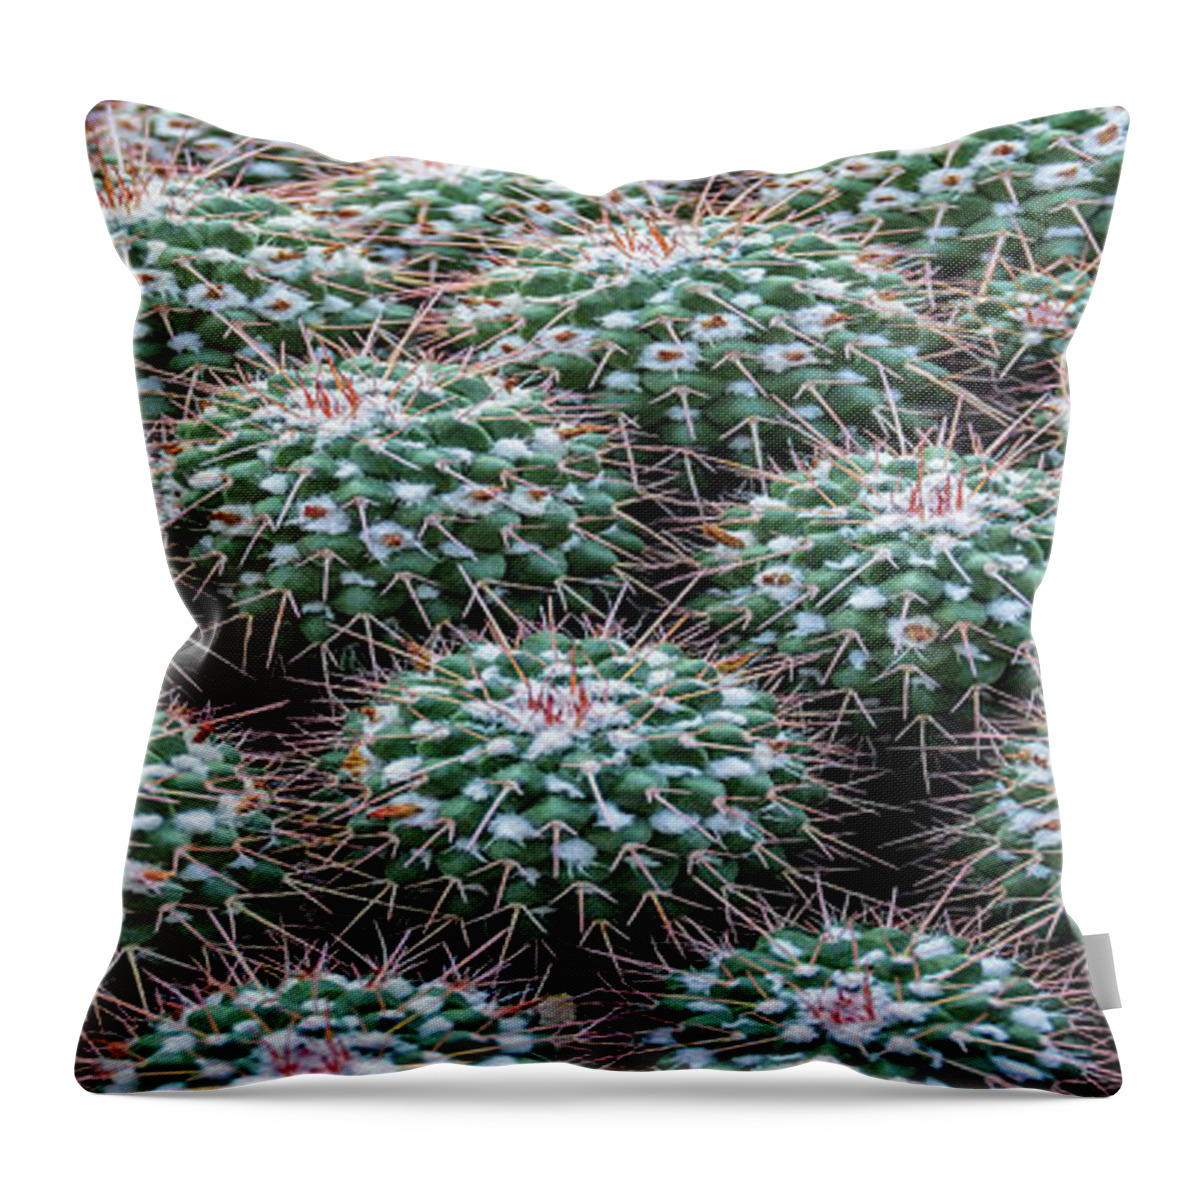 Plant Throw Pillow featuring the photograph Pincushion Cactus #2 by Pat Cook